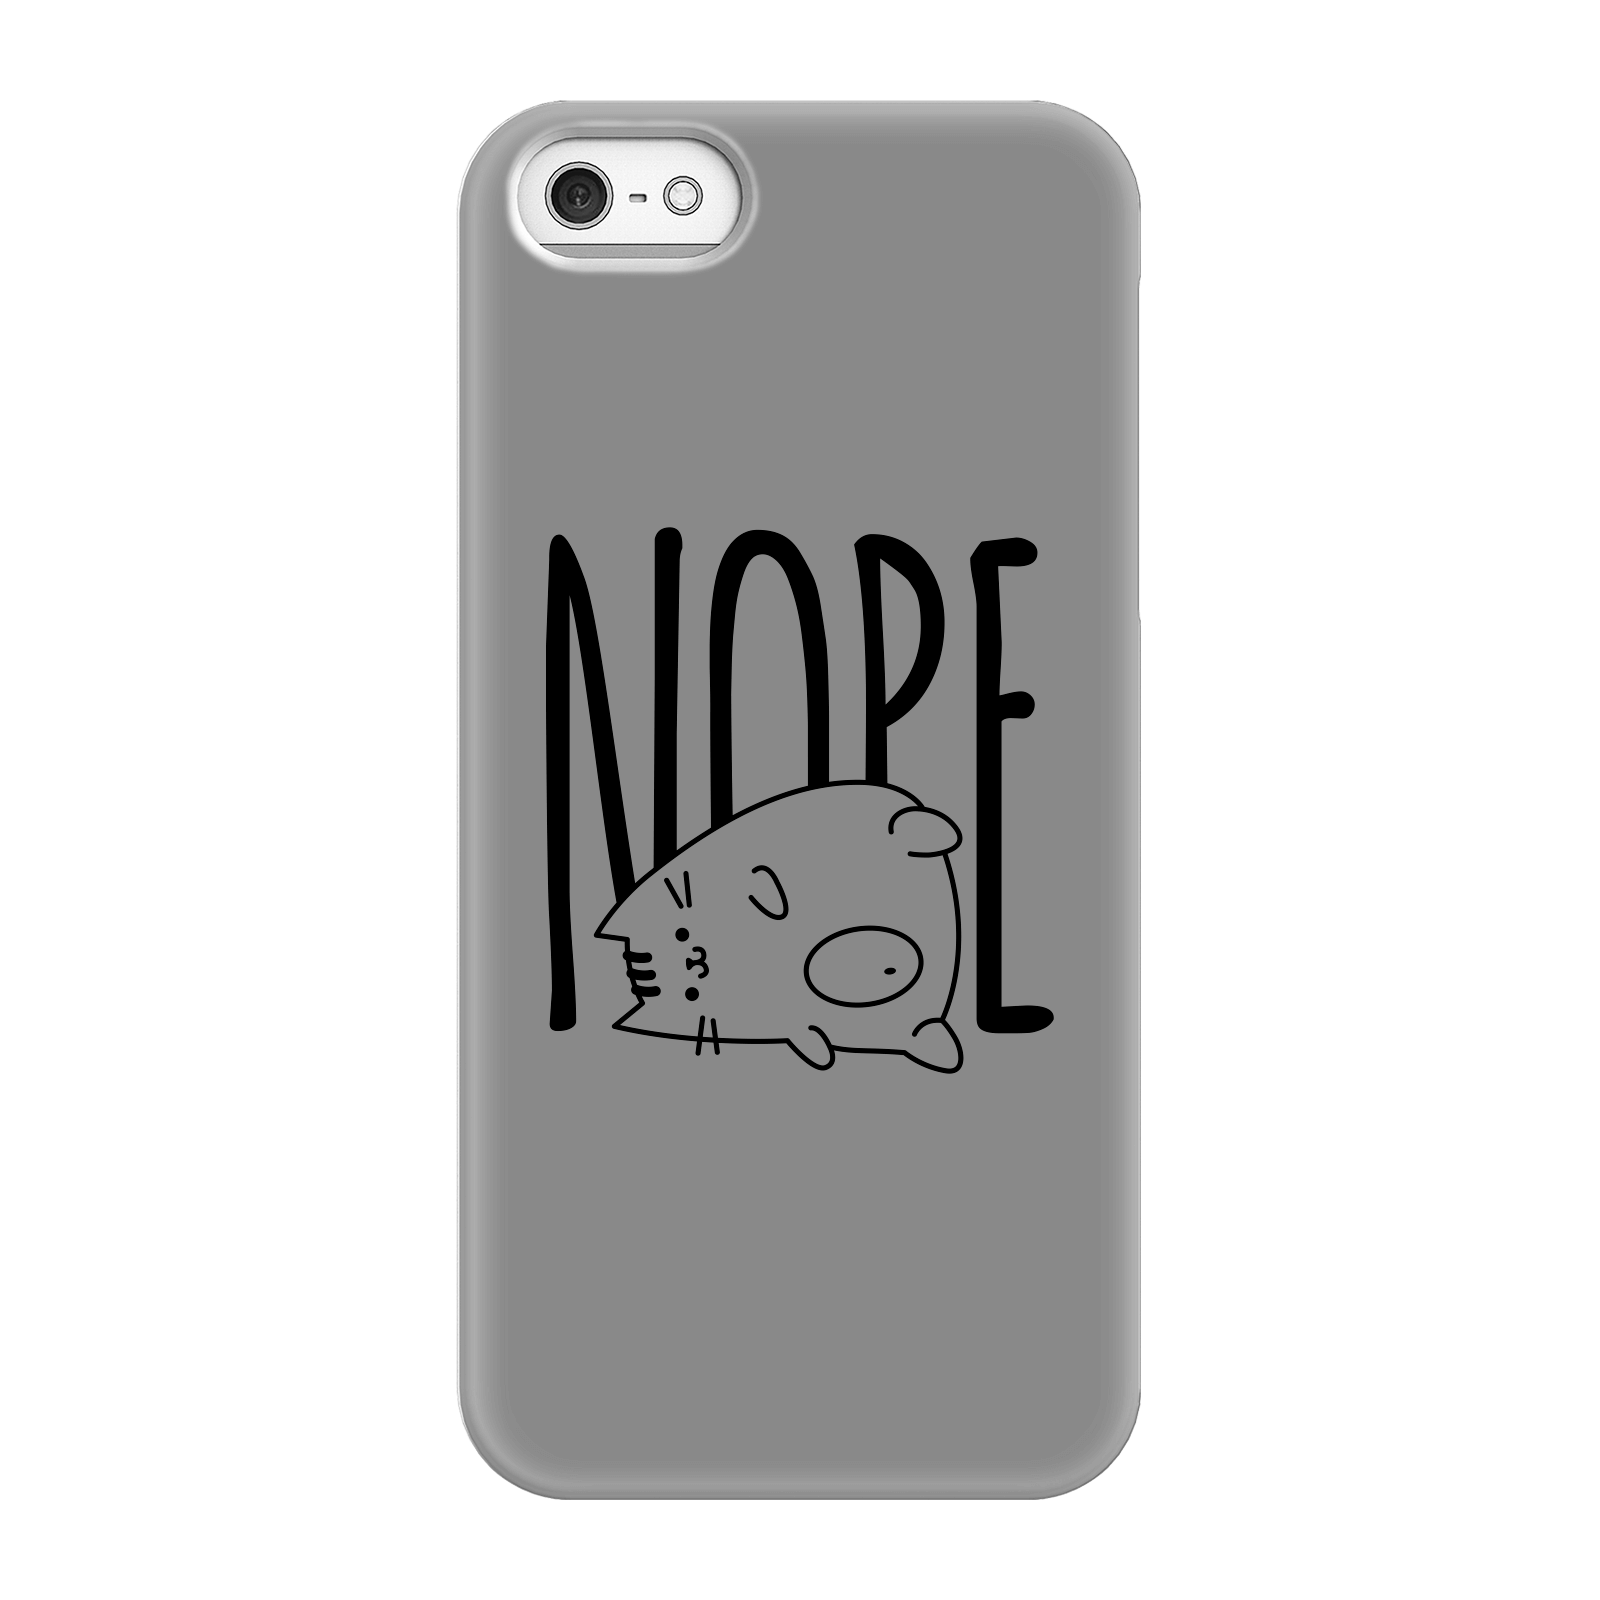 Nope Phone Case for iPhone and Android - iPhone 5/5s - Snap Case - Matte